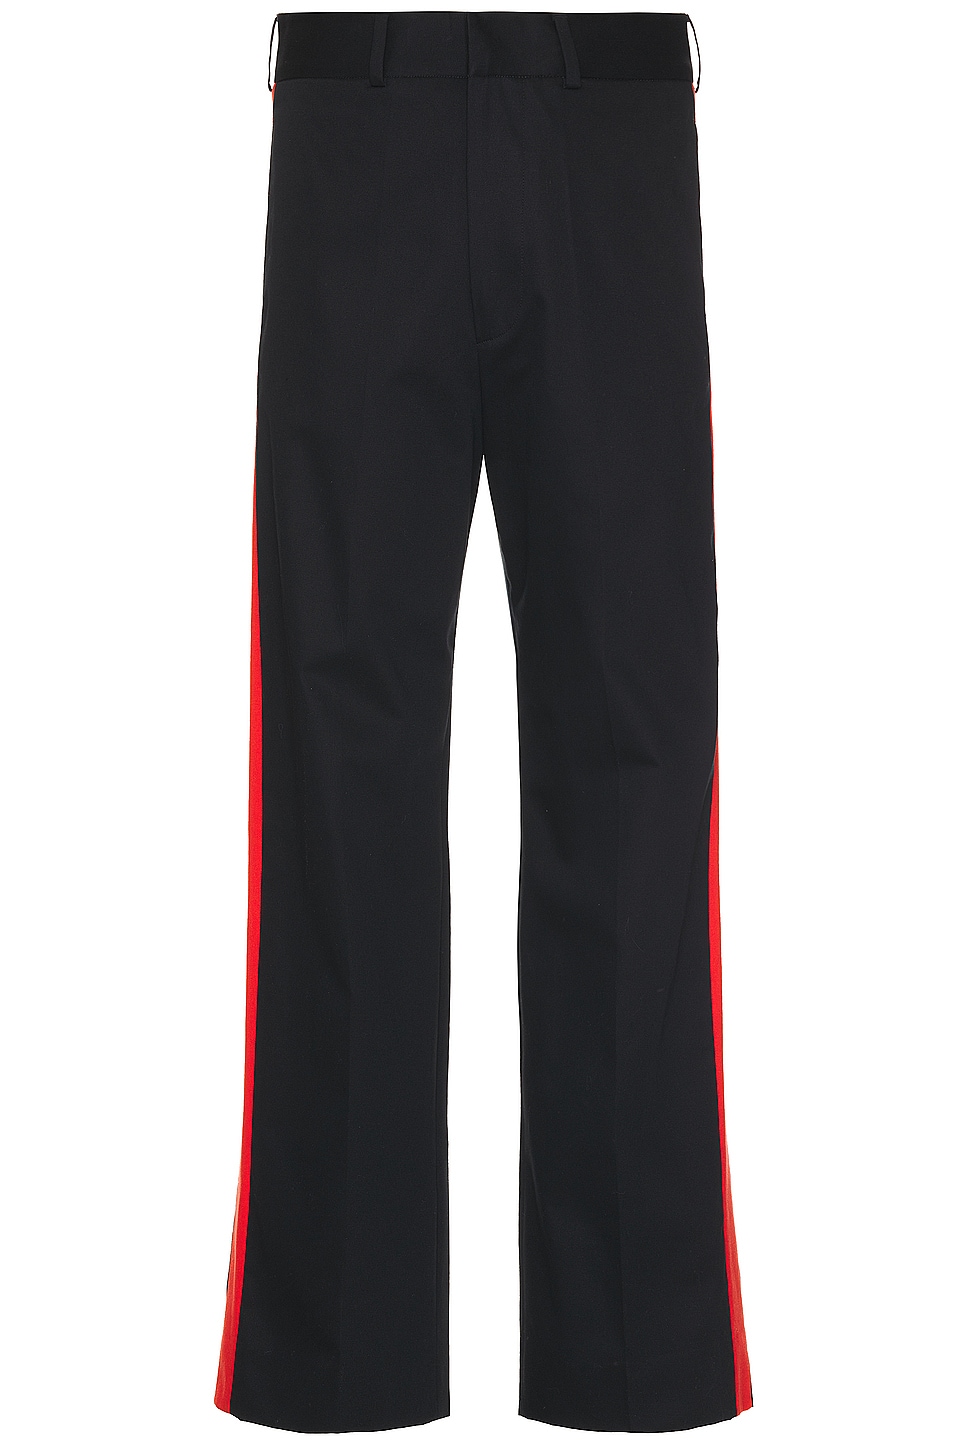 Image 1 of Palm Angels X Formula 1 Racing Chino Pant in Black & Red